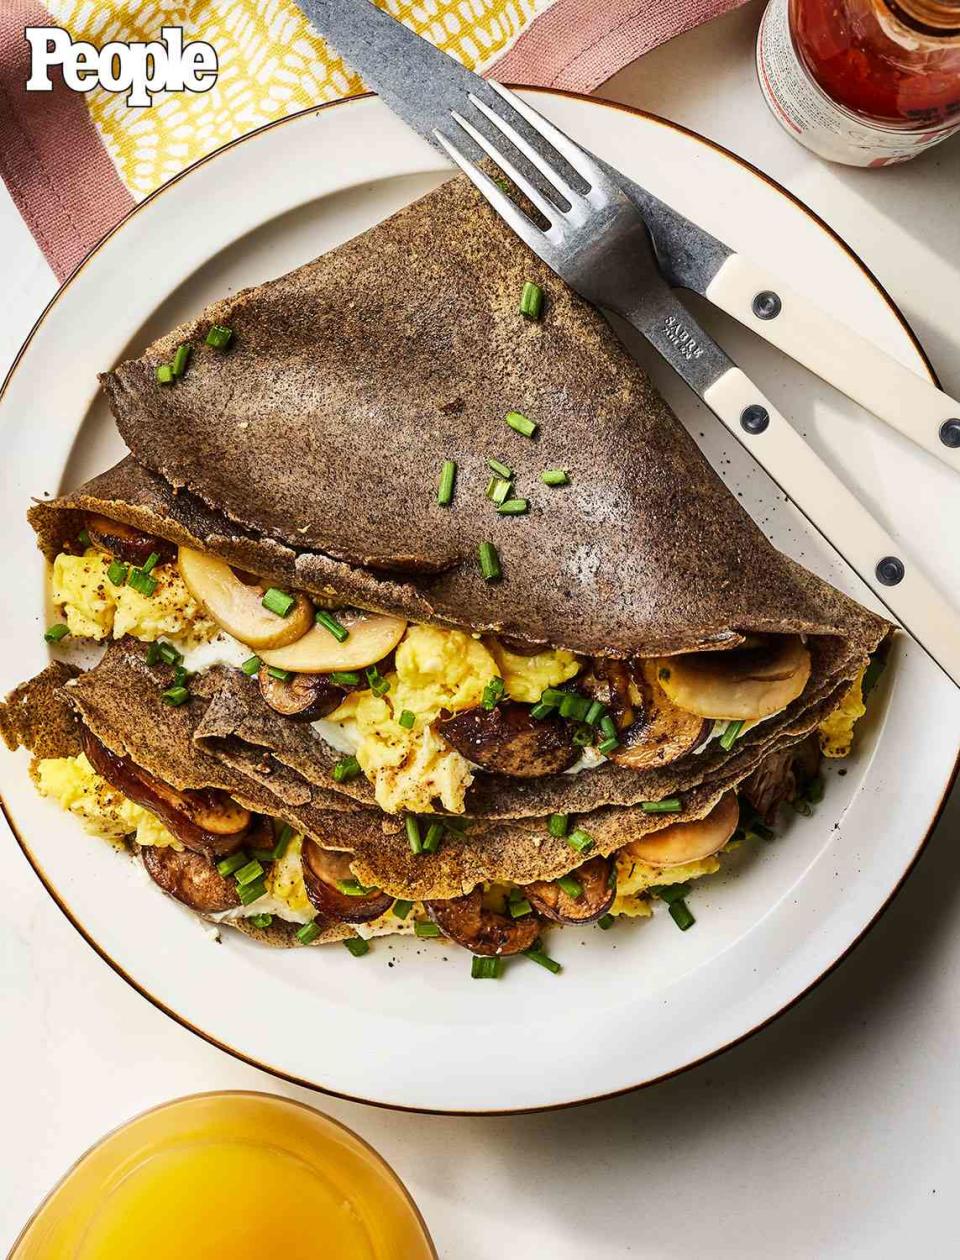 <p>Greg Dupree</p> Suzanne Cupps’ Buckwheat Crepes with Eggs, Ricotta and Mushrooms